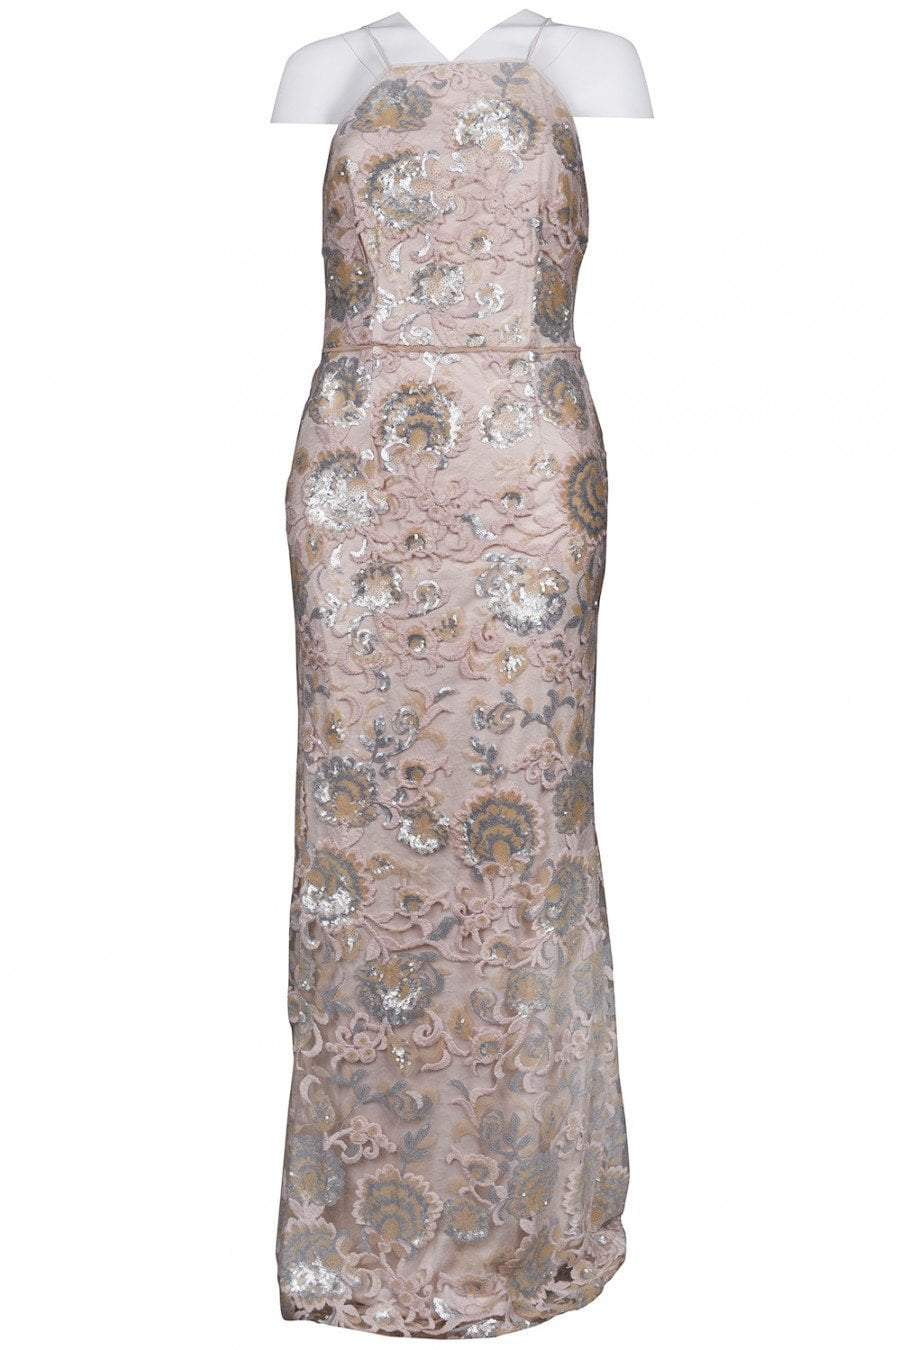 Adrianna Papell - AP1E202991 Floral Sequined Halter Sheath Dress In Nude